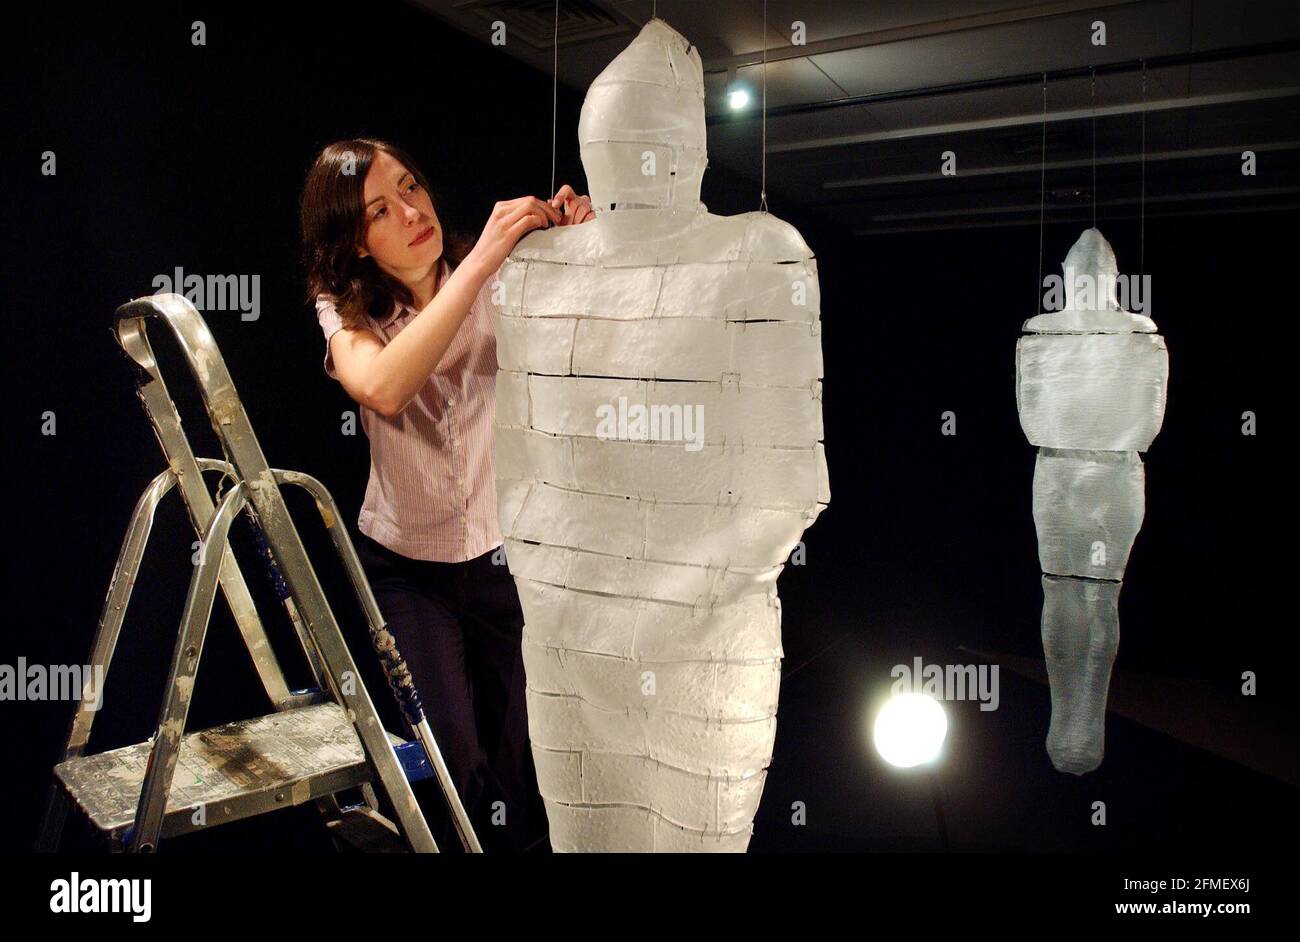 Exhibition Organiser Julia Davies checking over the finished glass installation entitled 'Brick Man' by artist Max Jacquard. The work is part of the 'Solid Air' exhibition, opening at the Crafts Council Gallery on Thursday 11th April.5 April 2002 photo Andy Paradise Stock Photo